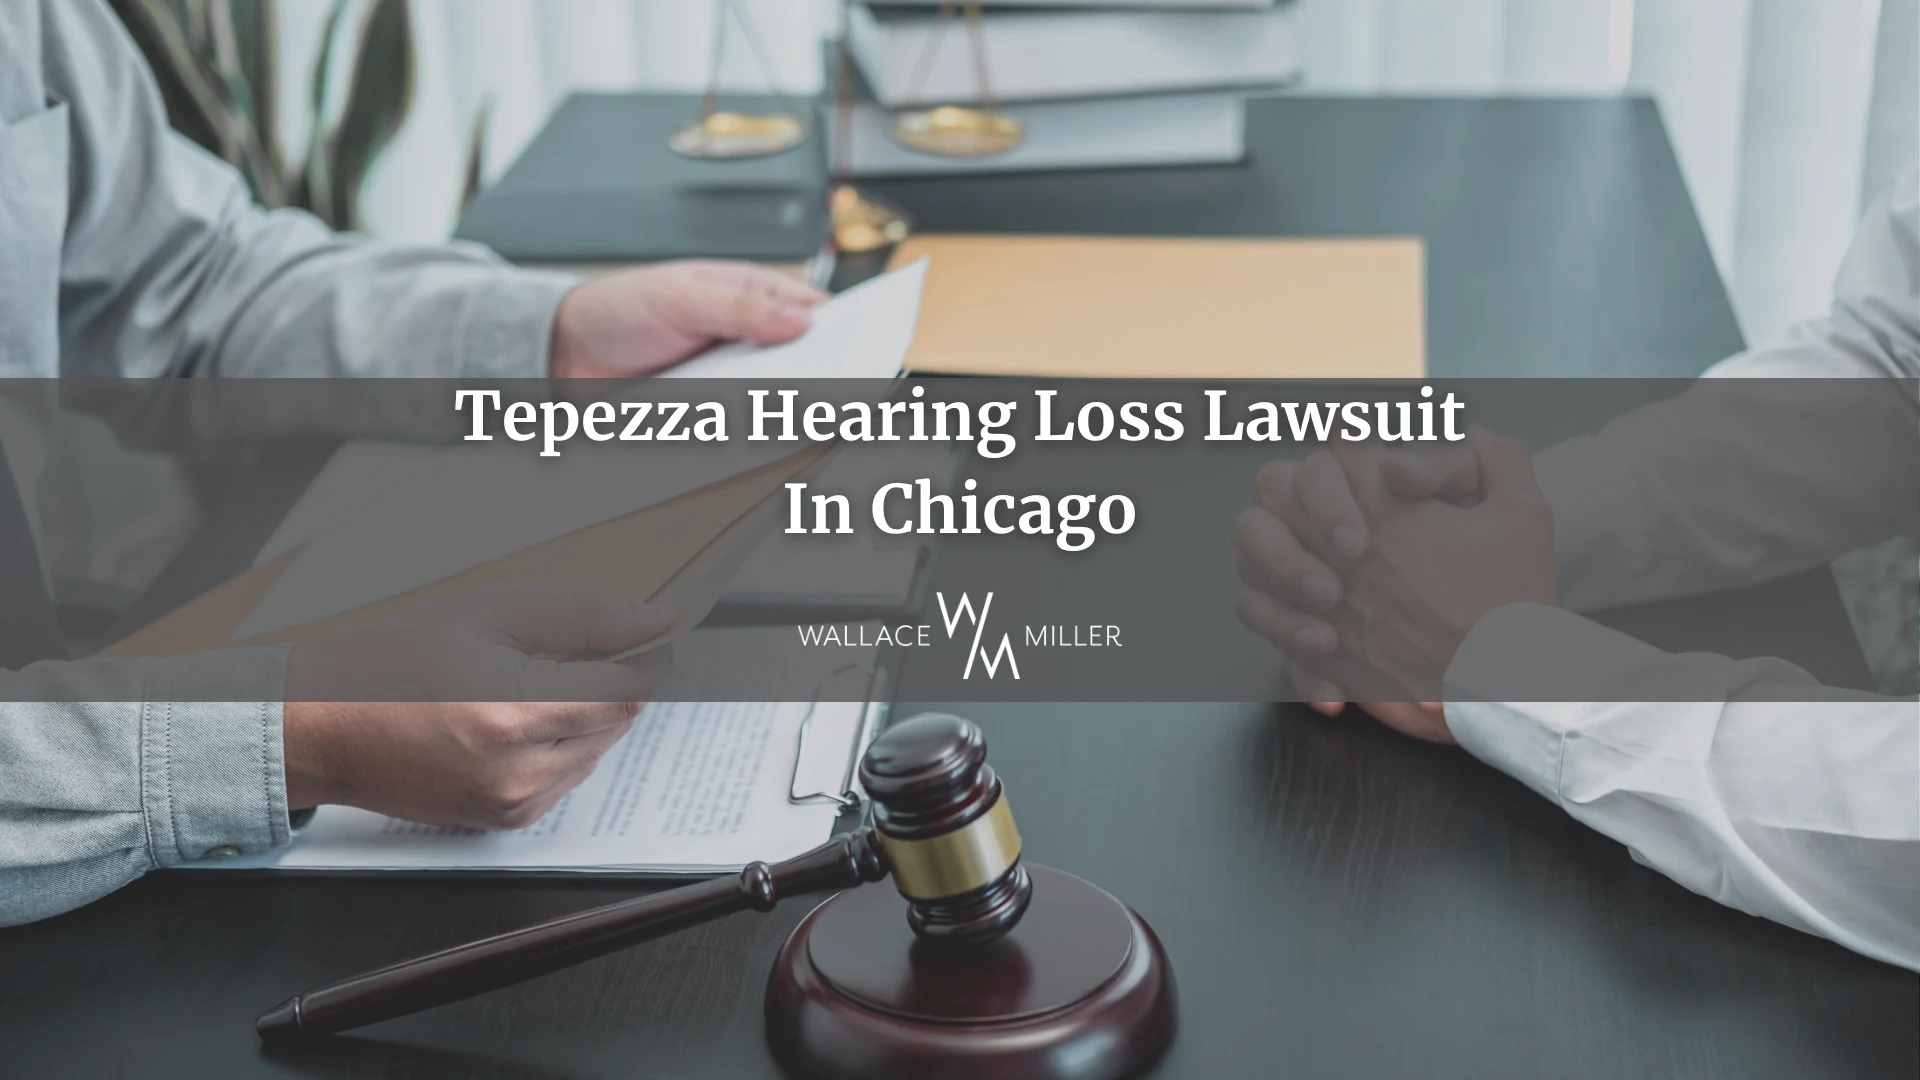 Tepezza Hearing Loss Lawsuit In Chicago